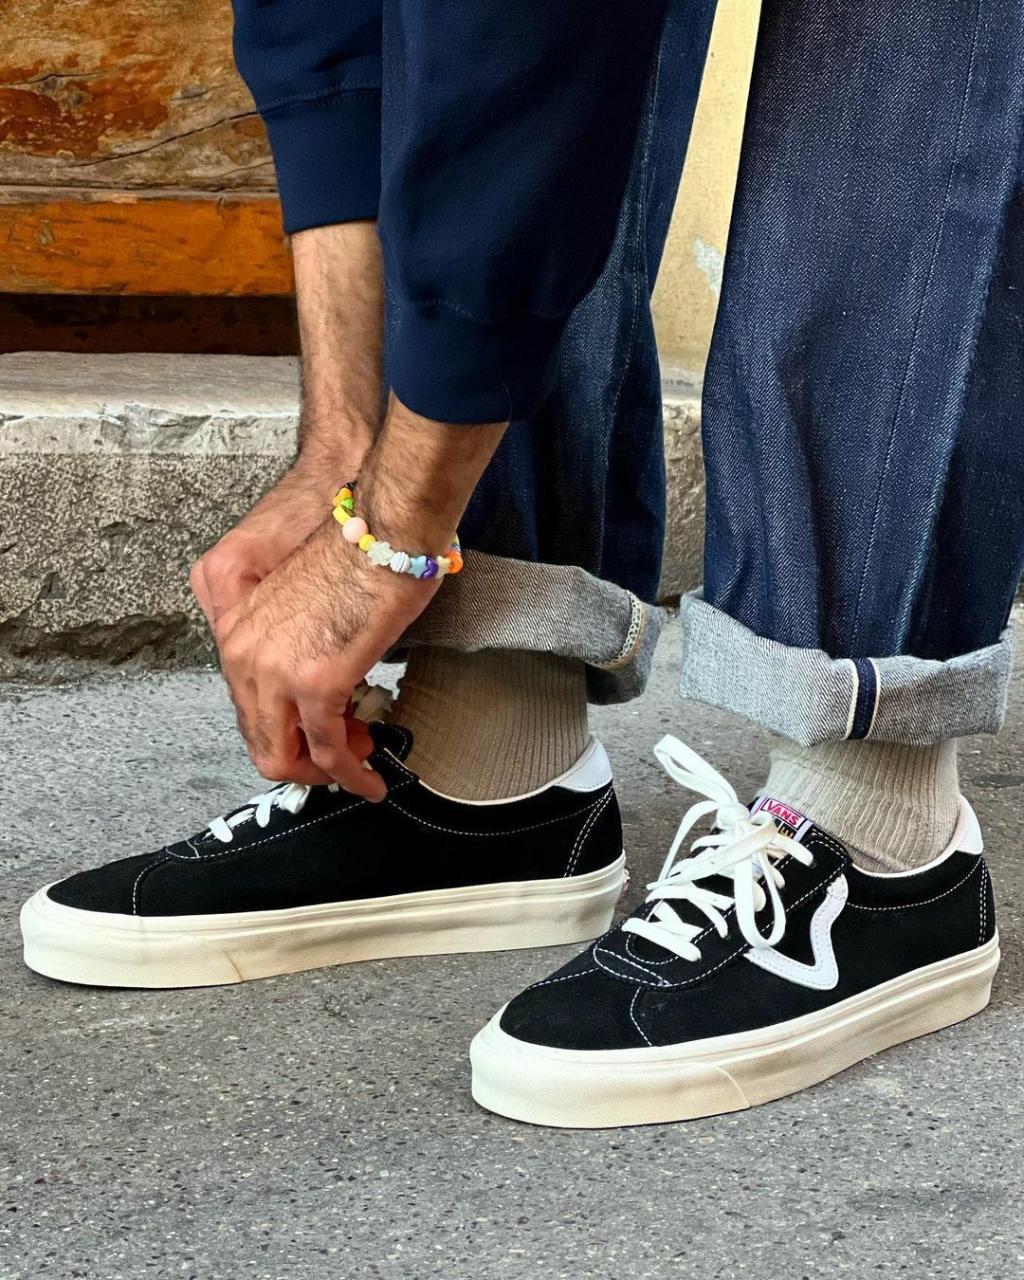 Vans Styles, Fit And History | Vans Buyers Guide | Allsole